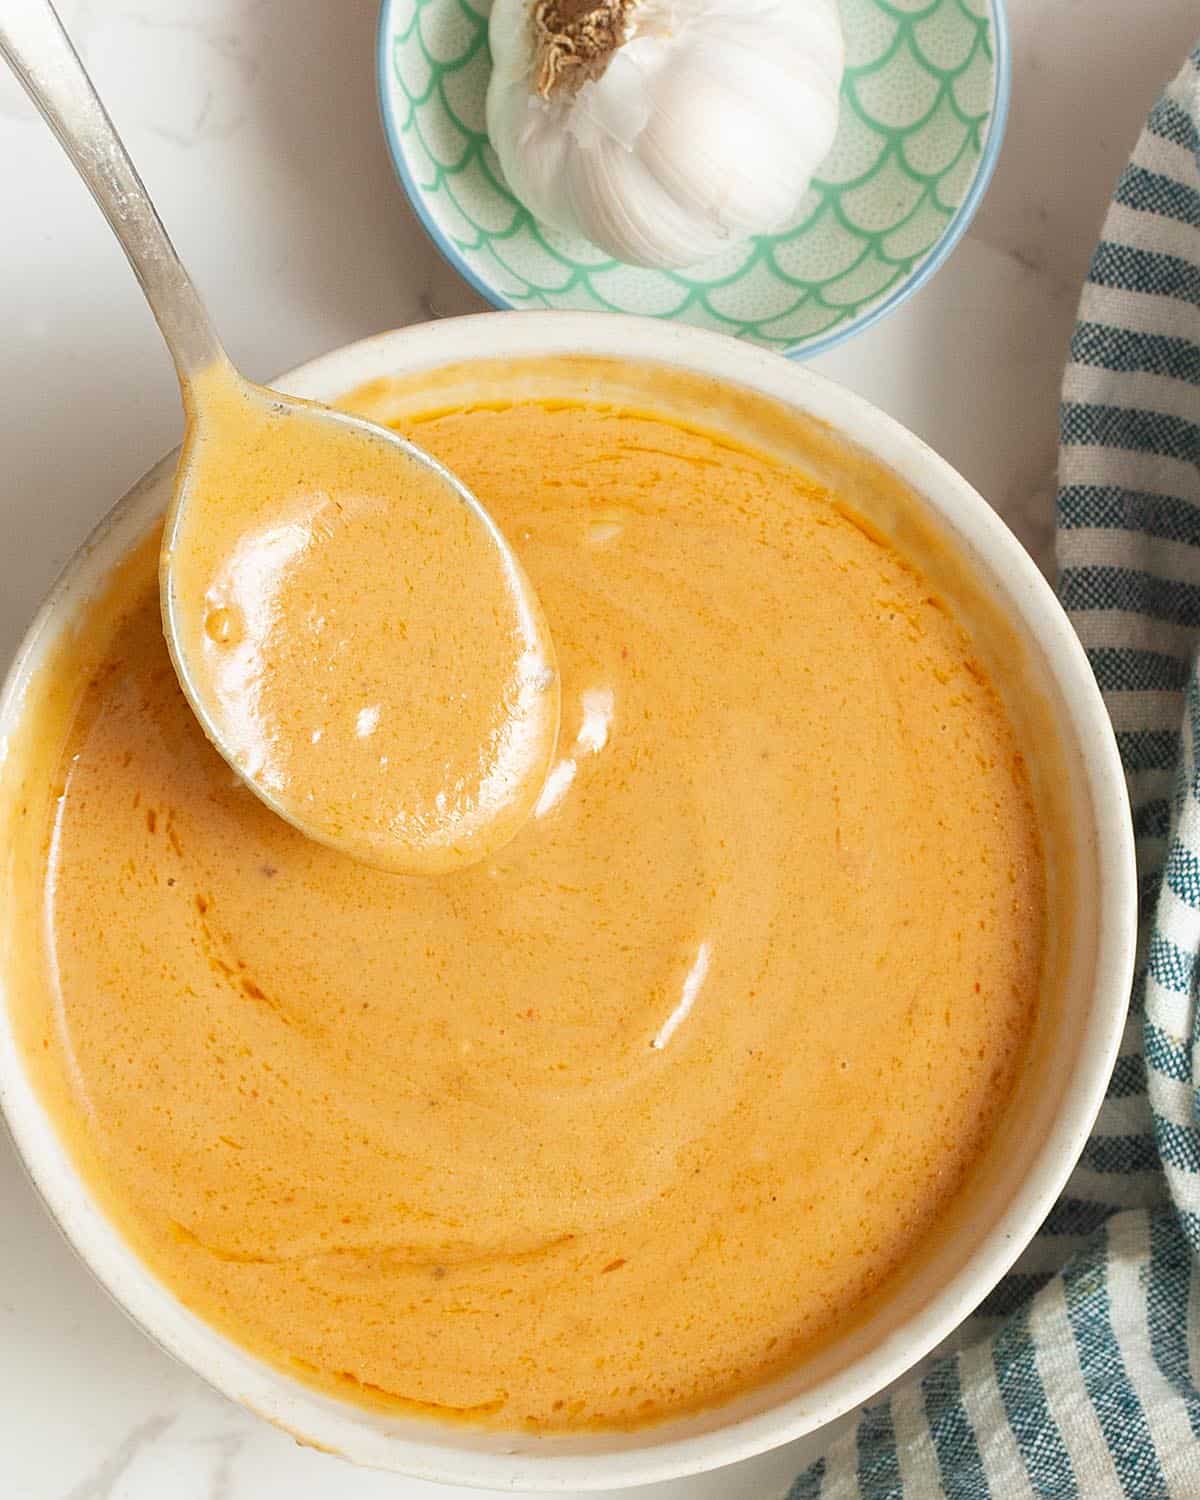 Creamy peanut colored sauce in a white bowl. A spoon is dipped to show the creamy consistenxtr.